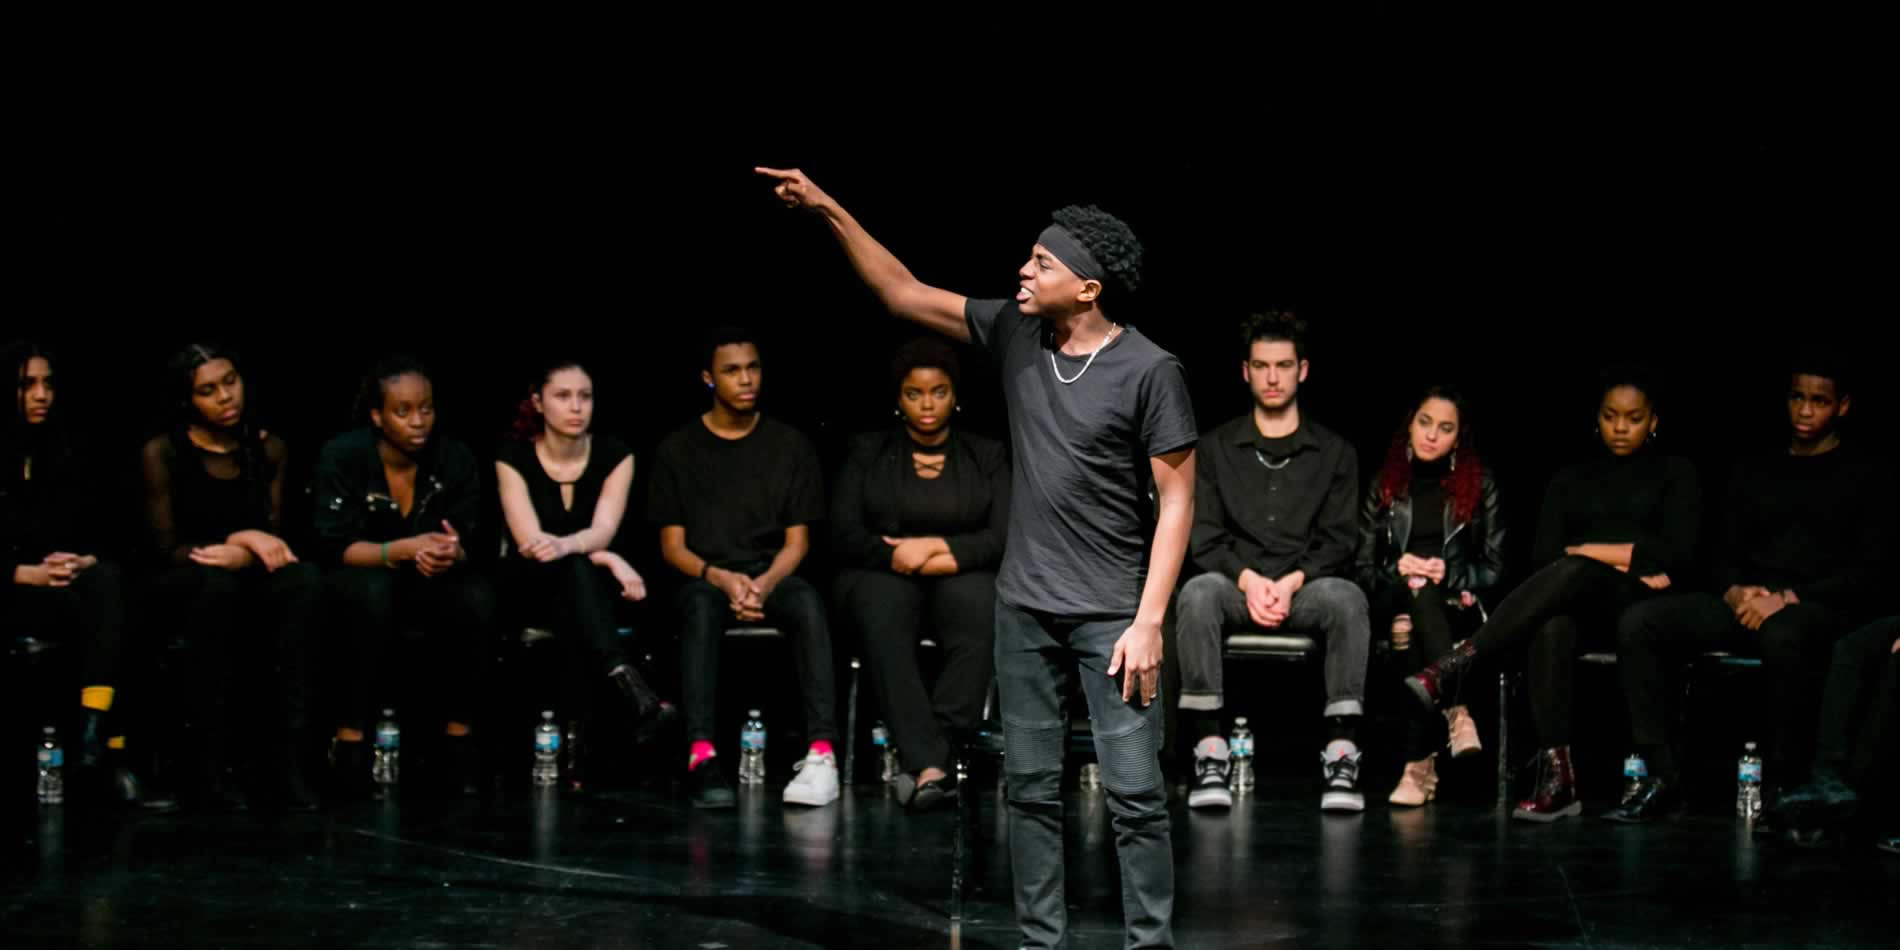 The Goodman Theatre Presents its 13th Annual August Wilson Monologue Competition